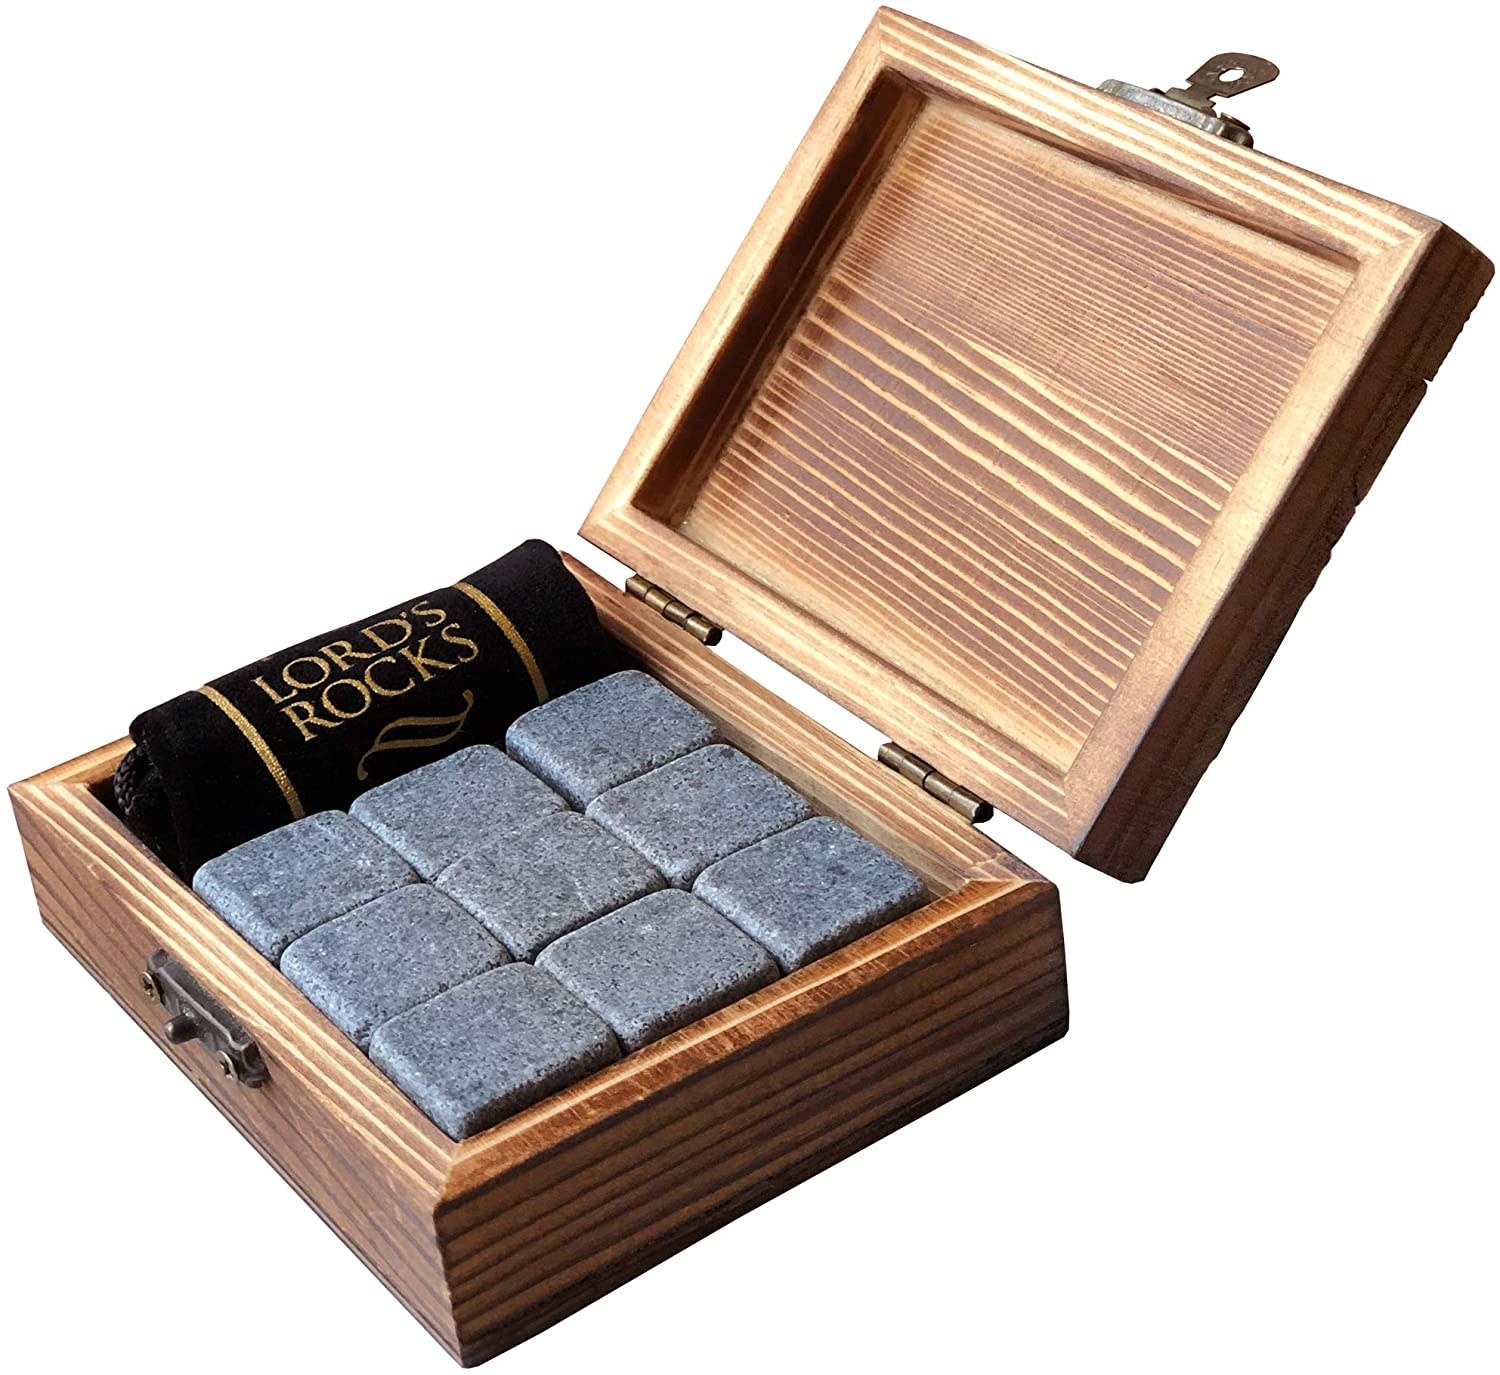 A wooden chest containing a bunch of grey whiskey cold stones.